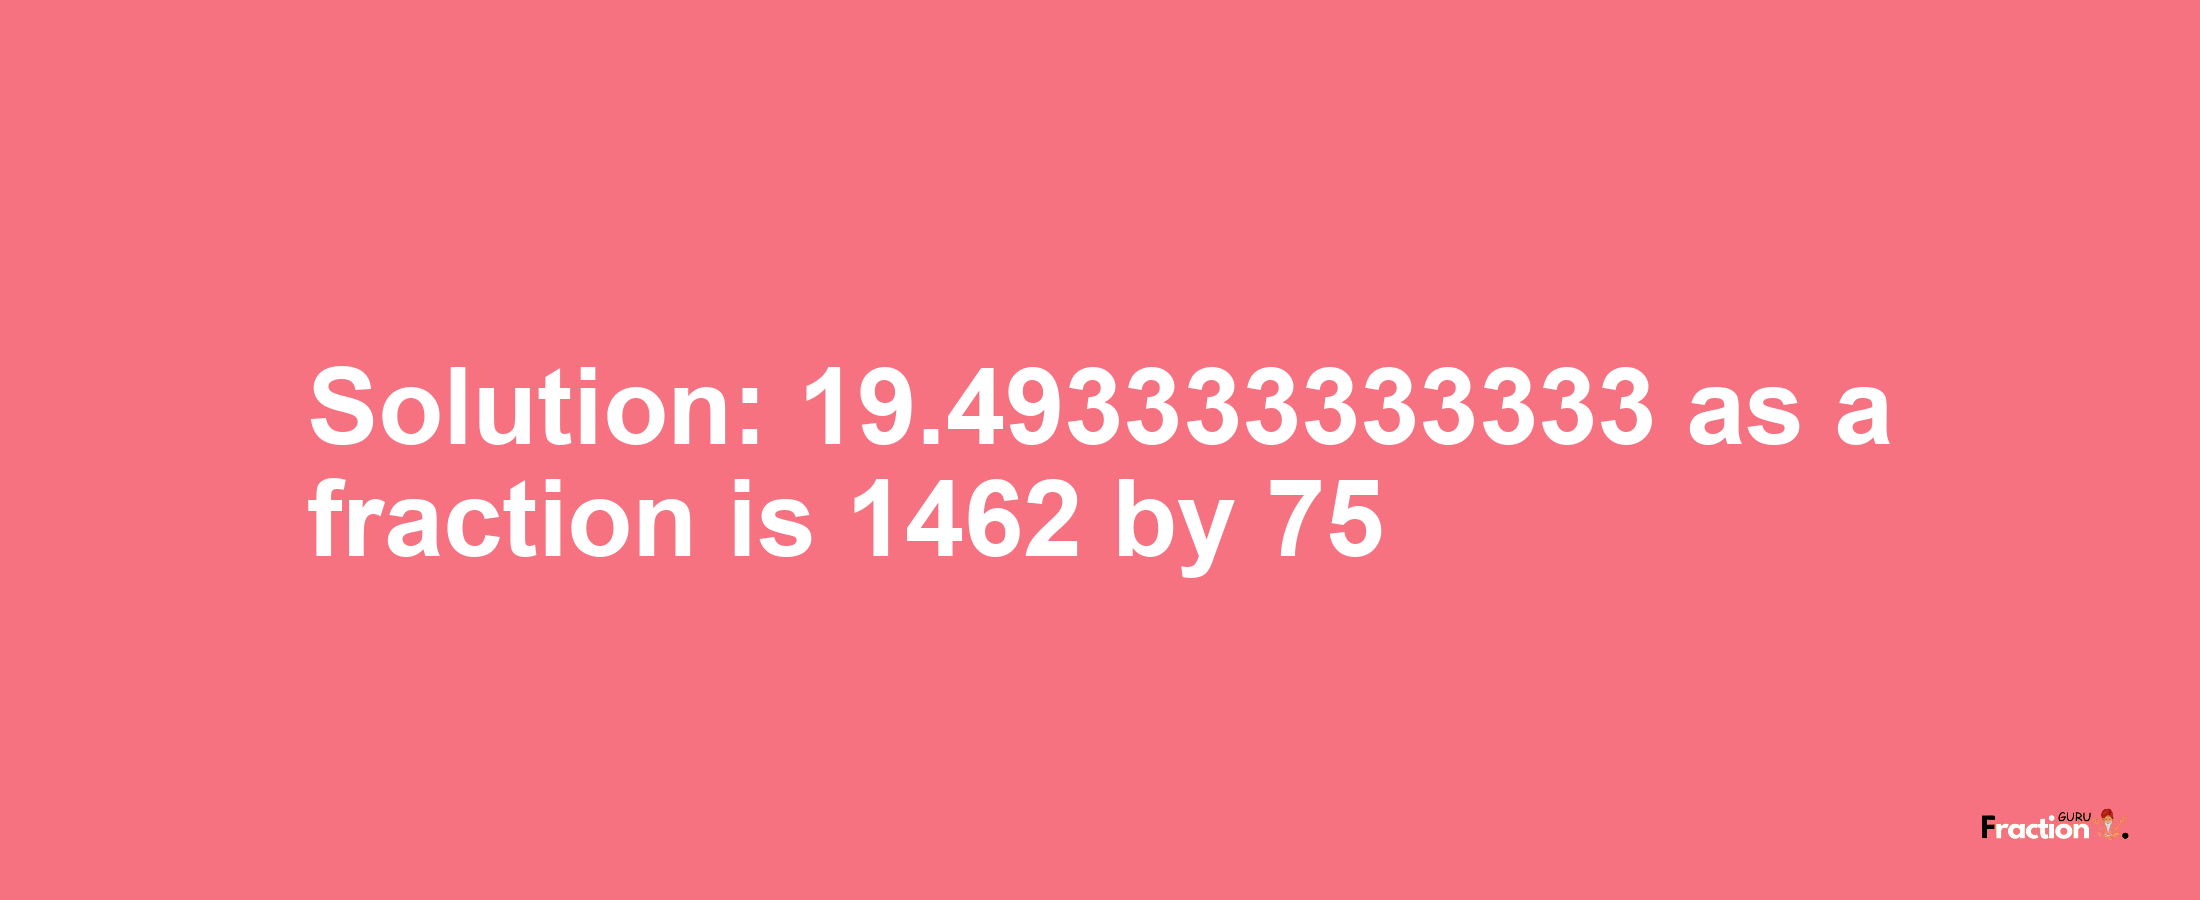 Solution:19.493333333333 as a fraction is 1462/75